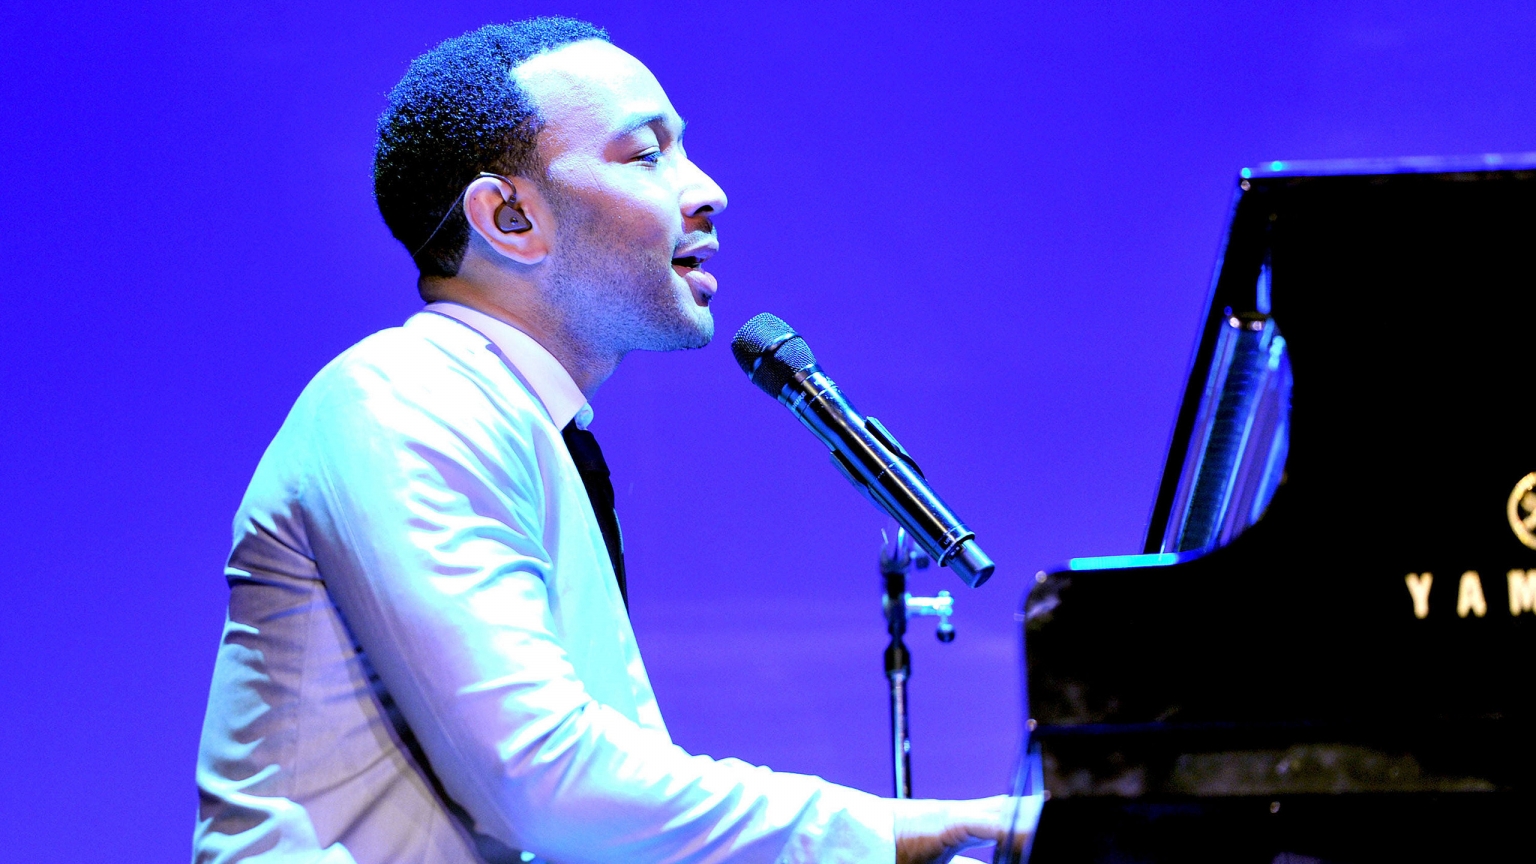 John Legend at Piano for 1536 x 864 HDTV resolution